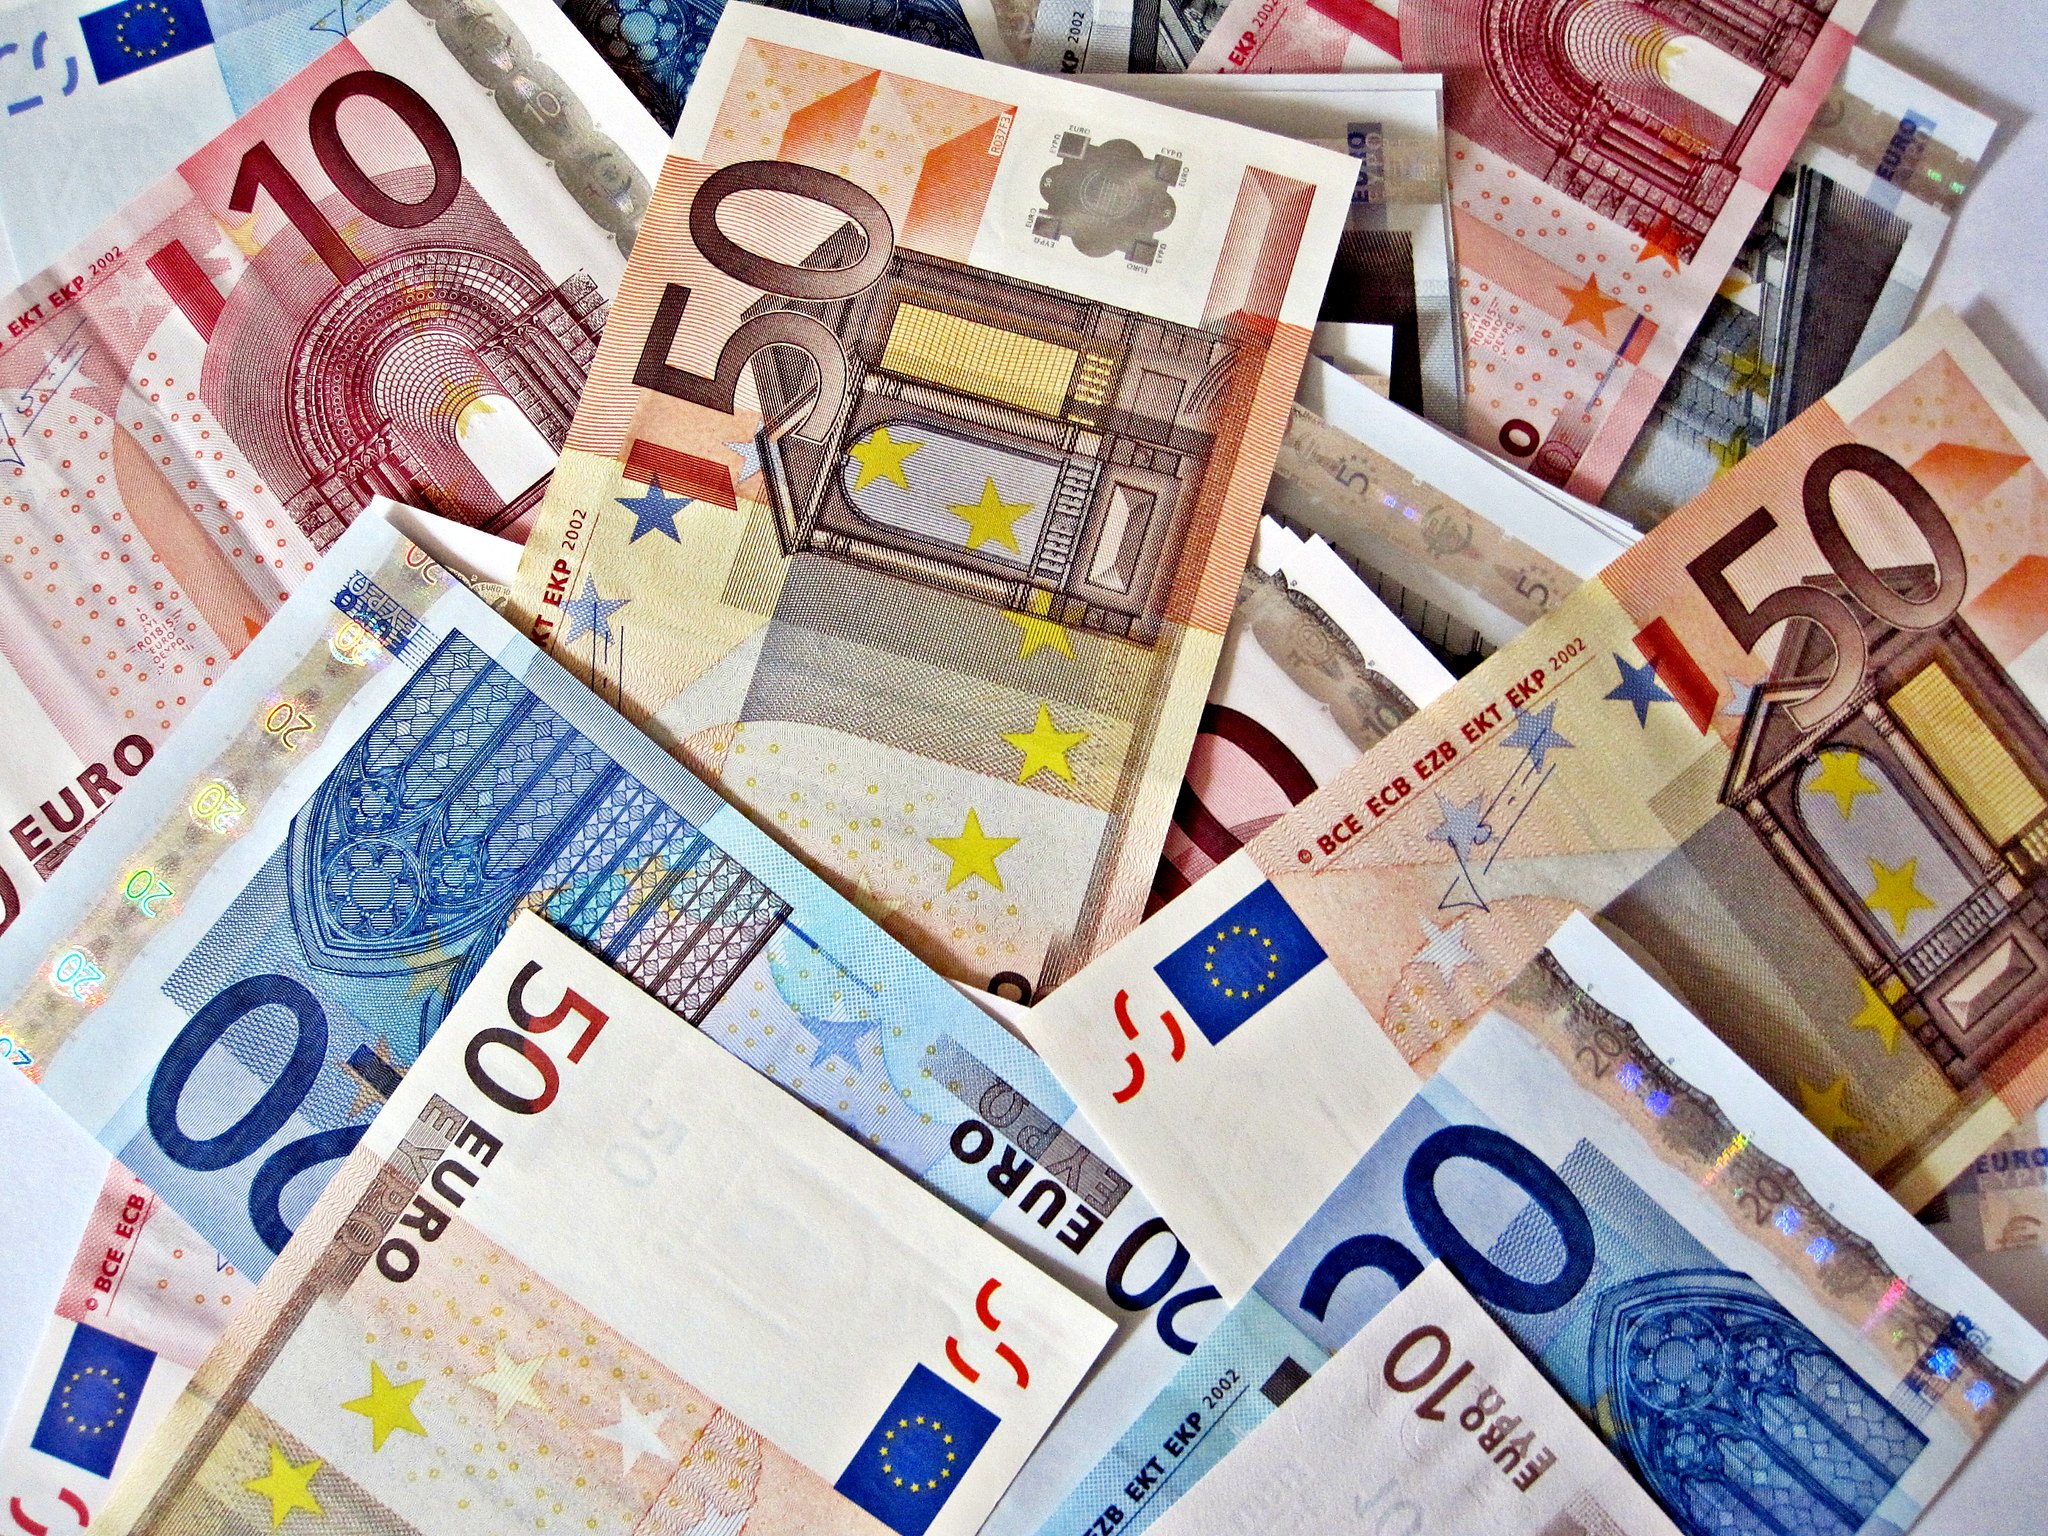 "Pile of Euro Notes" by Images_of_Money is licensed under CC BY 2.0.